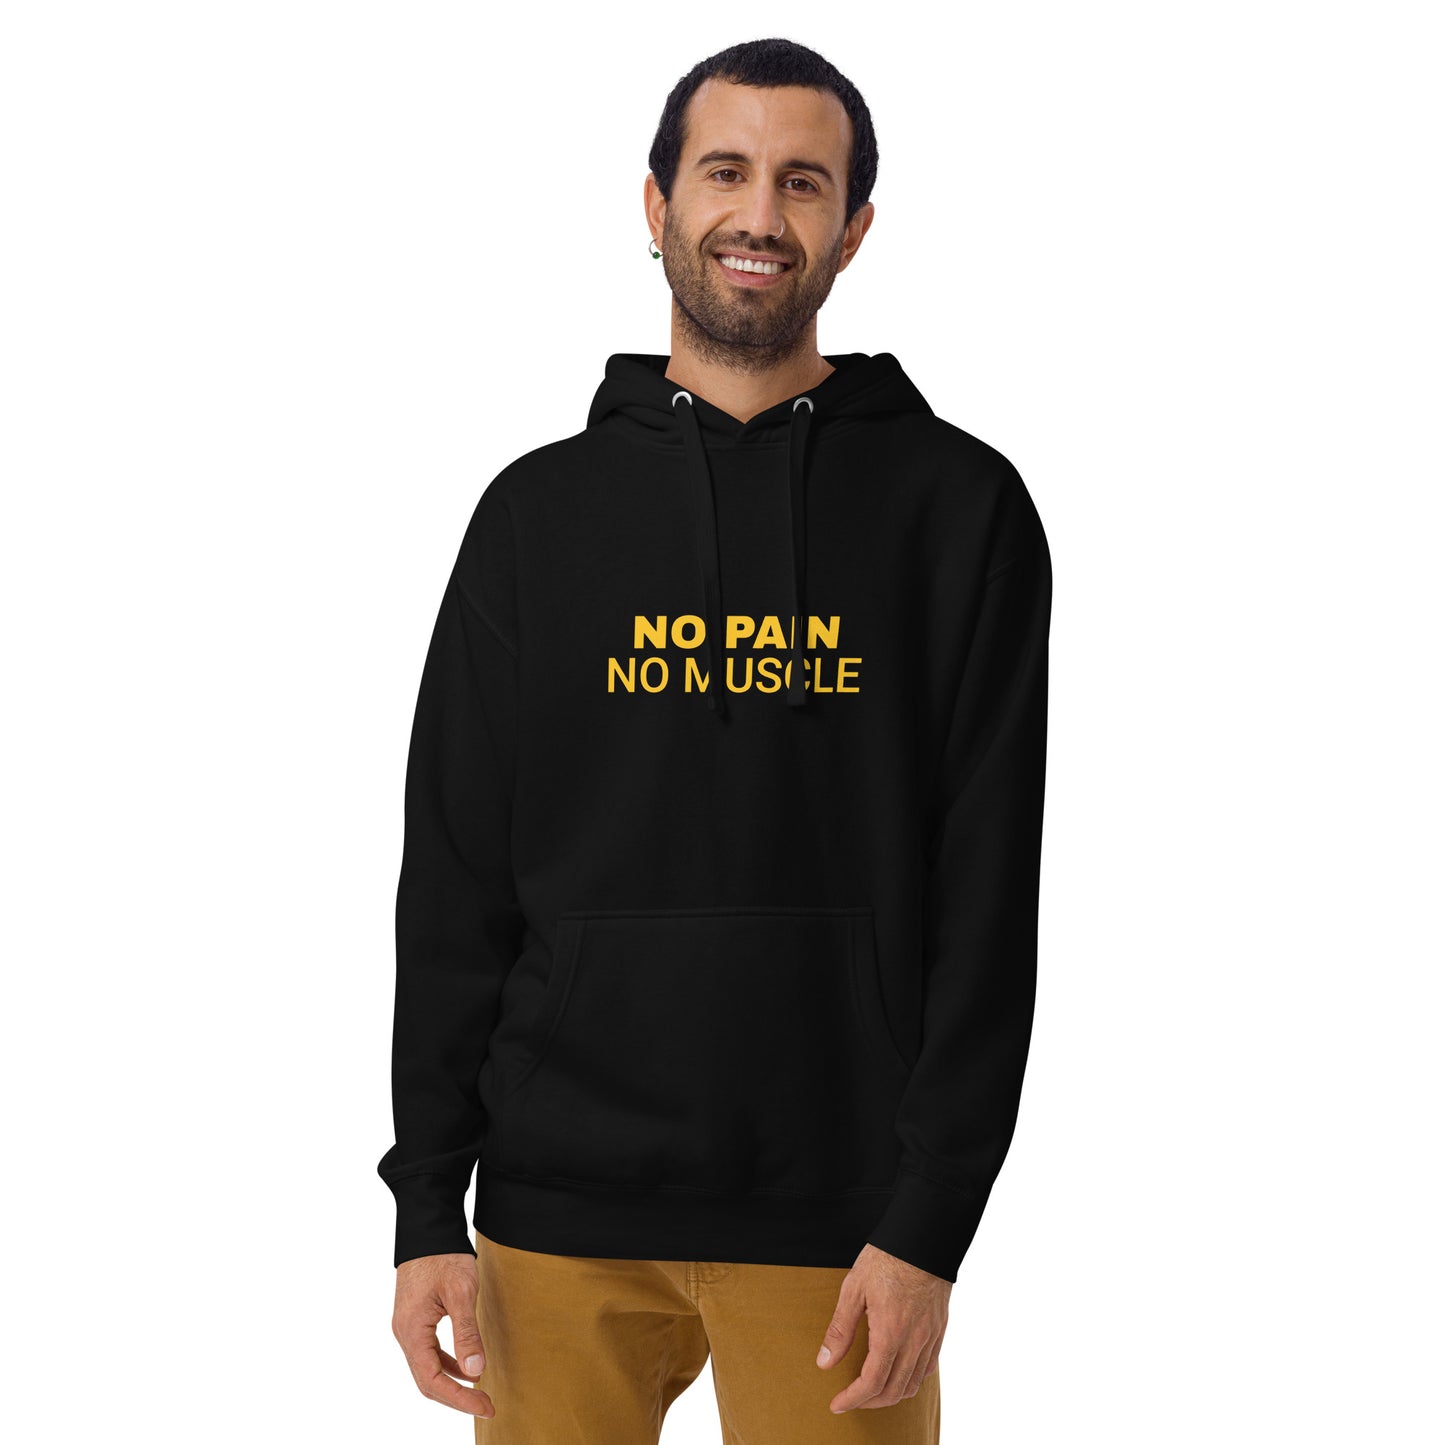 No Pain No Muscle Unisex Hoodie